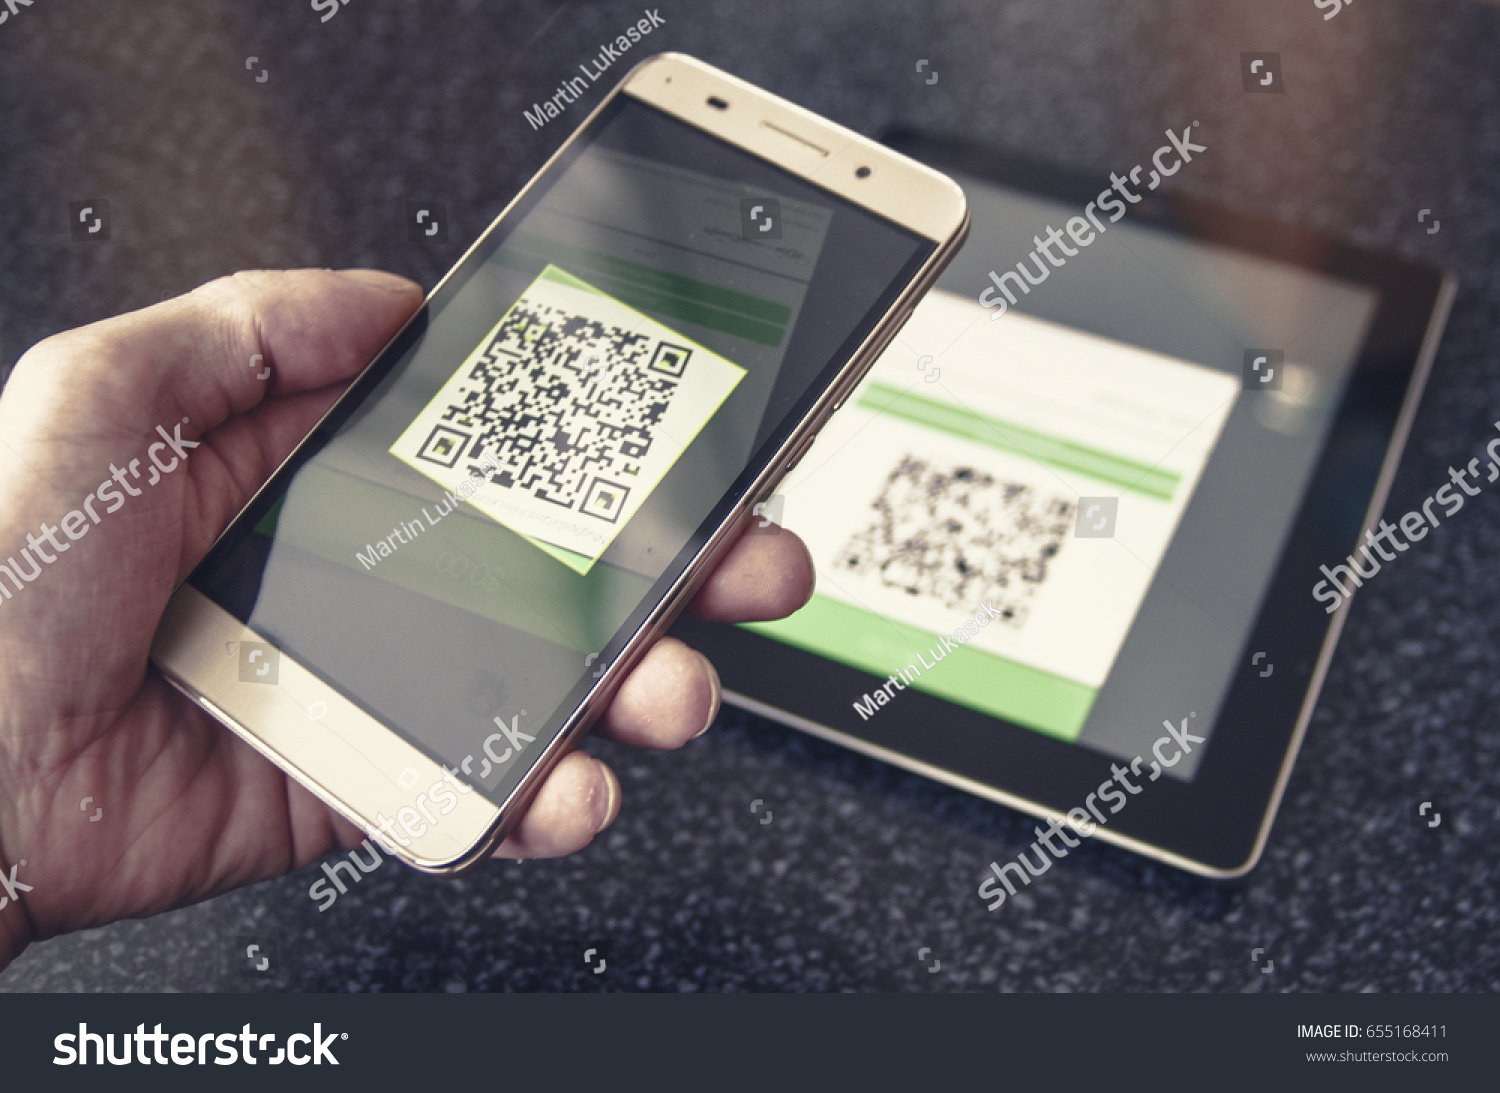 Easy Bitcoin Qr Code Payment Transaction Stock Photo Edit Now - 